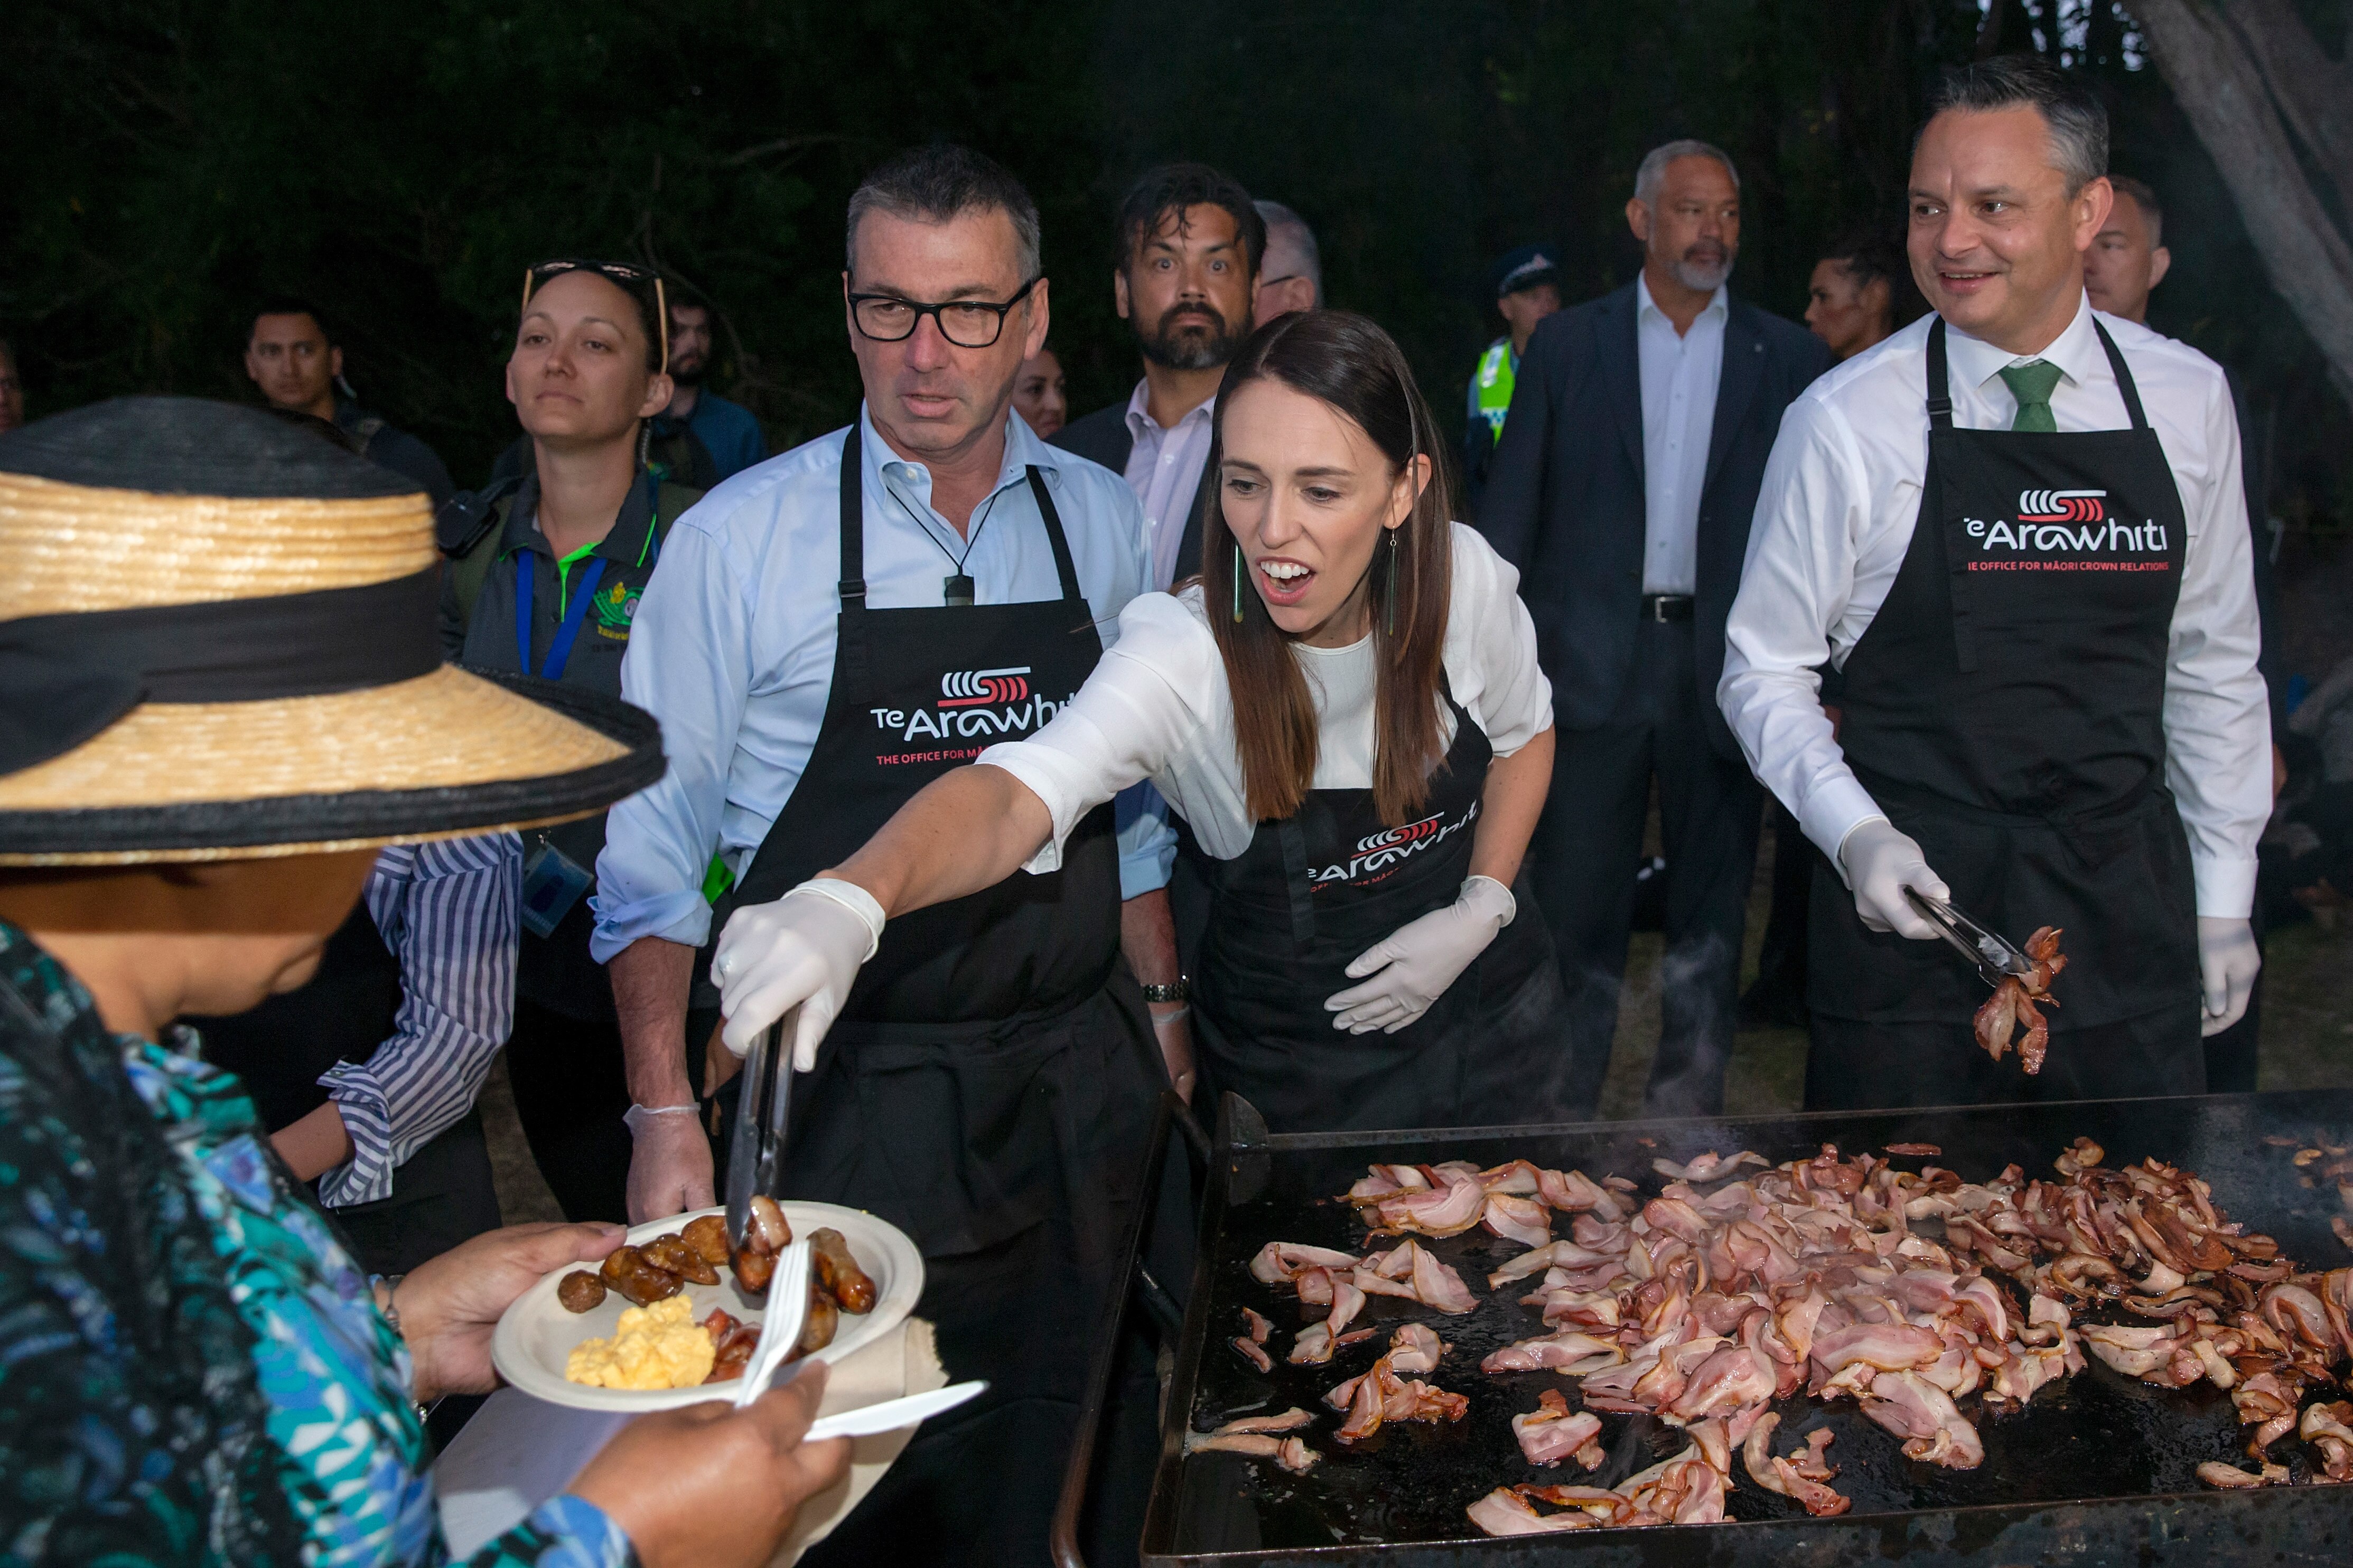 NZ Labour MP Duncan Webb, PM Jacinda Ardern and Climate Change Minister James Shaw serve up a barbecue after a dawn ceremony on Waitangi Day in 2020.